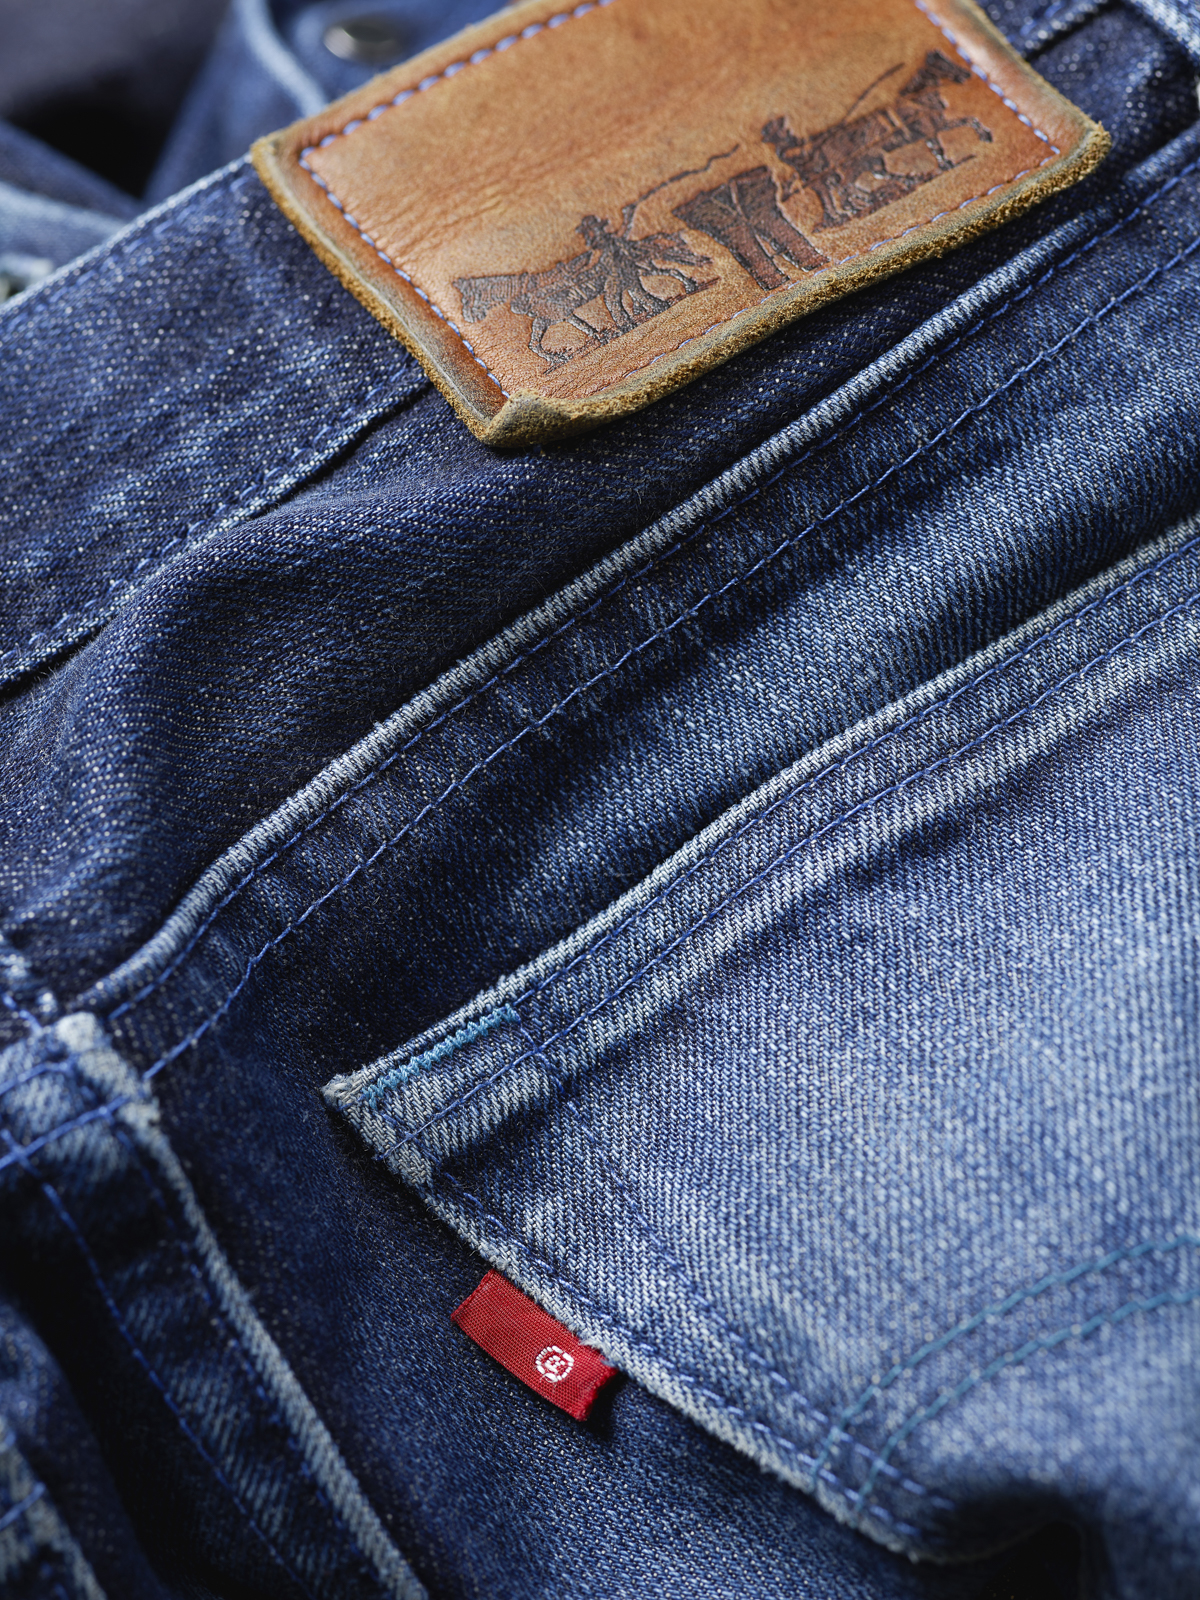 Levi's bespoke jeans – Update and 501st pair – Permanent Style